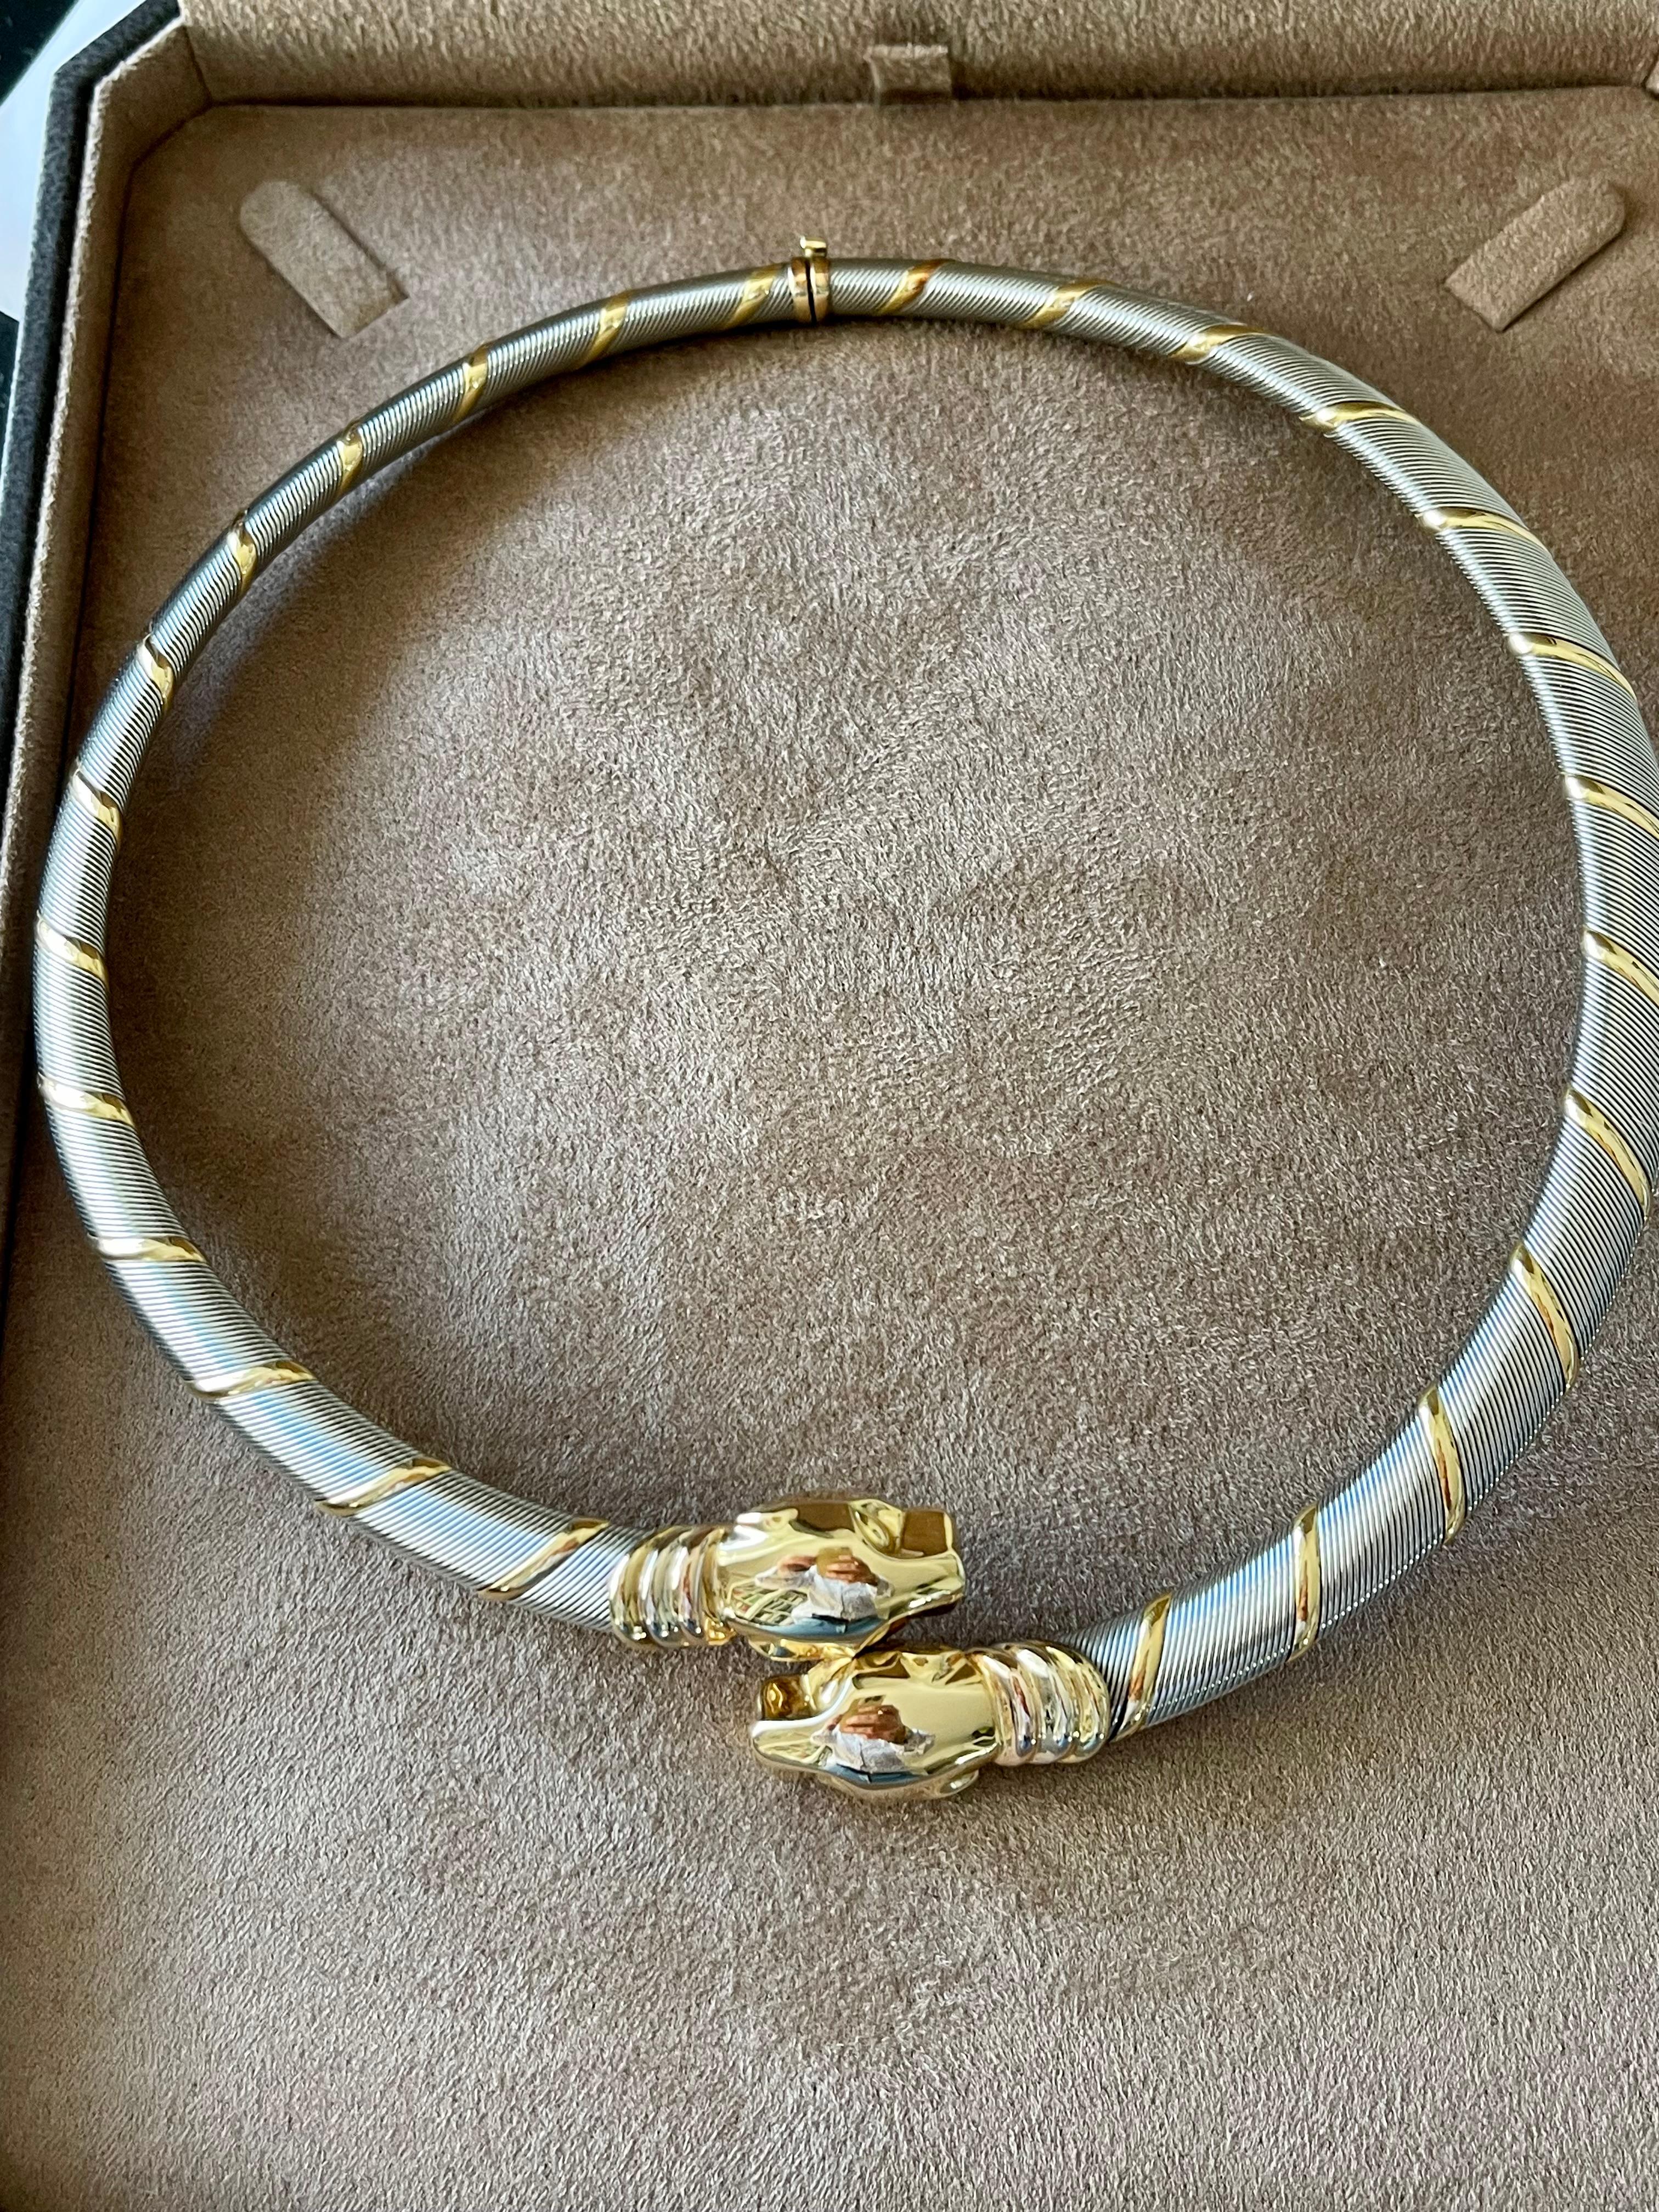 A wonderful Vintage Cartier 18 K Gold Cougar Panthere Necklace, sumptuously hand-made in Cartier's Parisian workshop in the late 1990s. This piece features three colours of 750 (18 K) yellow, white and rose gold wire, wrapped around a gold solenoid,